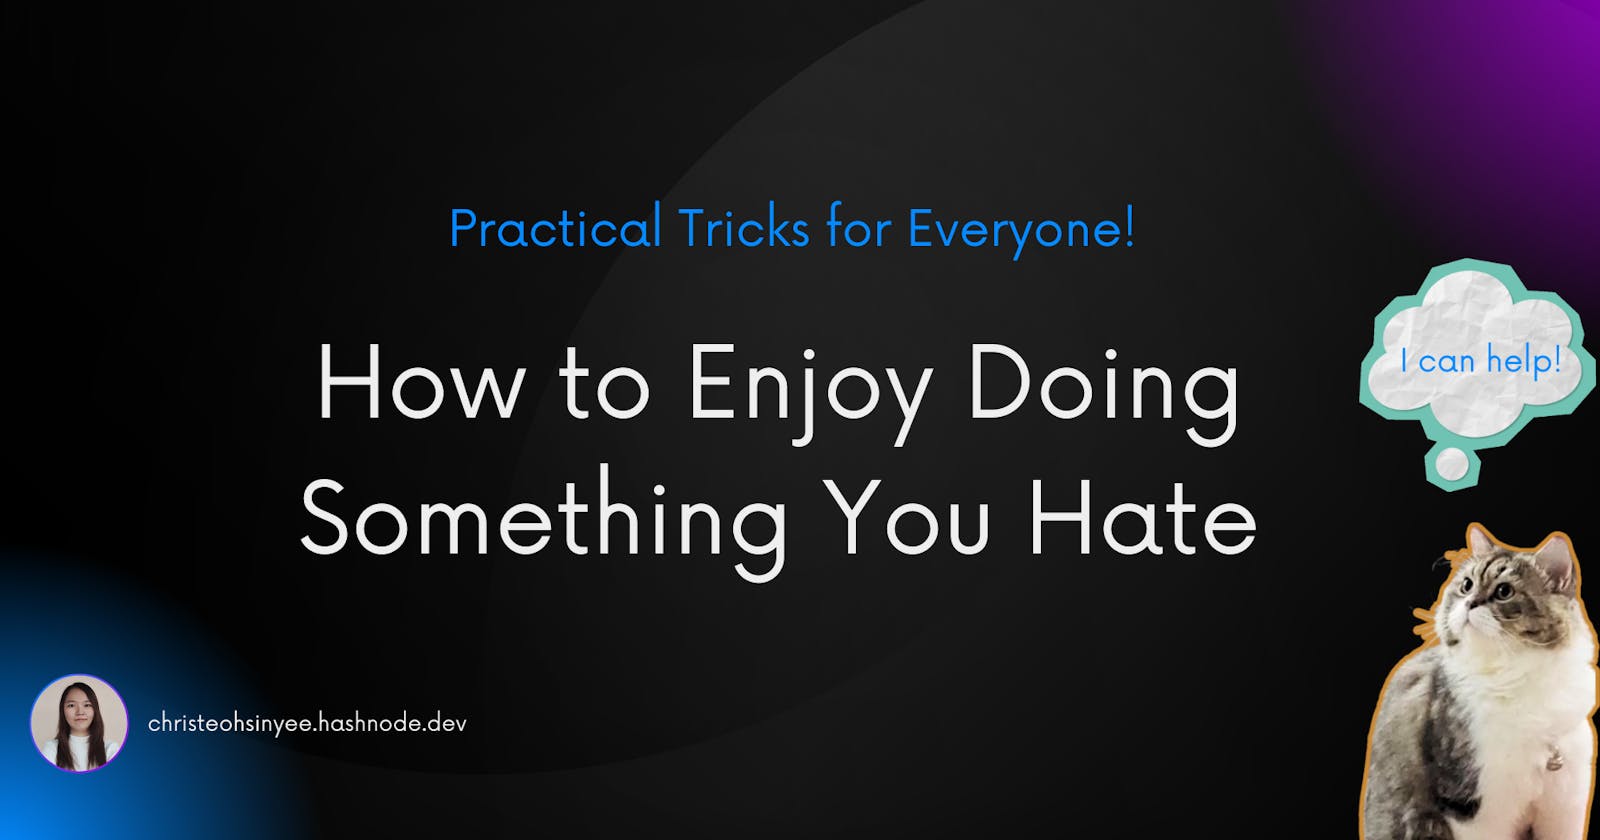 How to Enjoy Doing Something You Hate